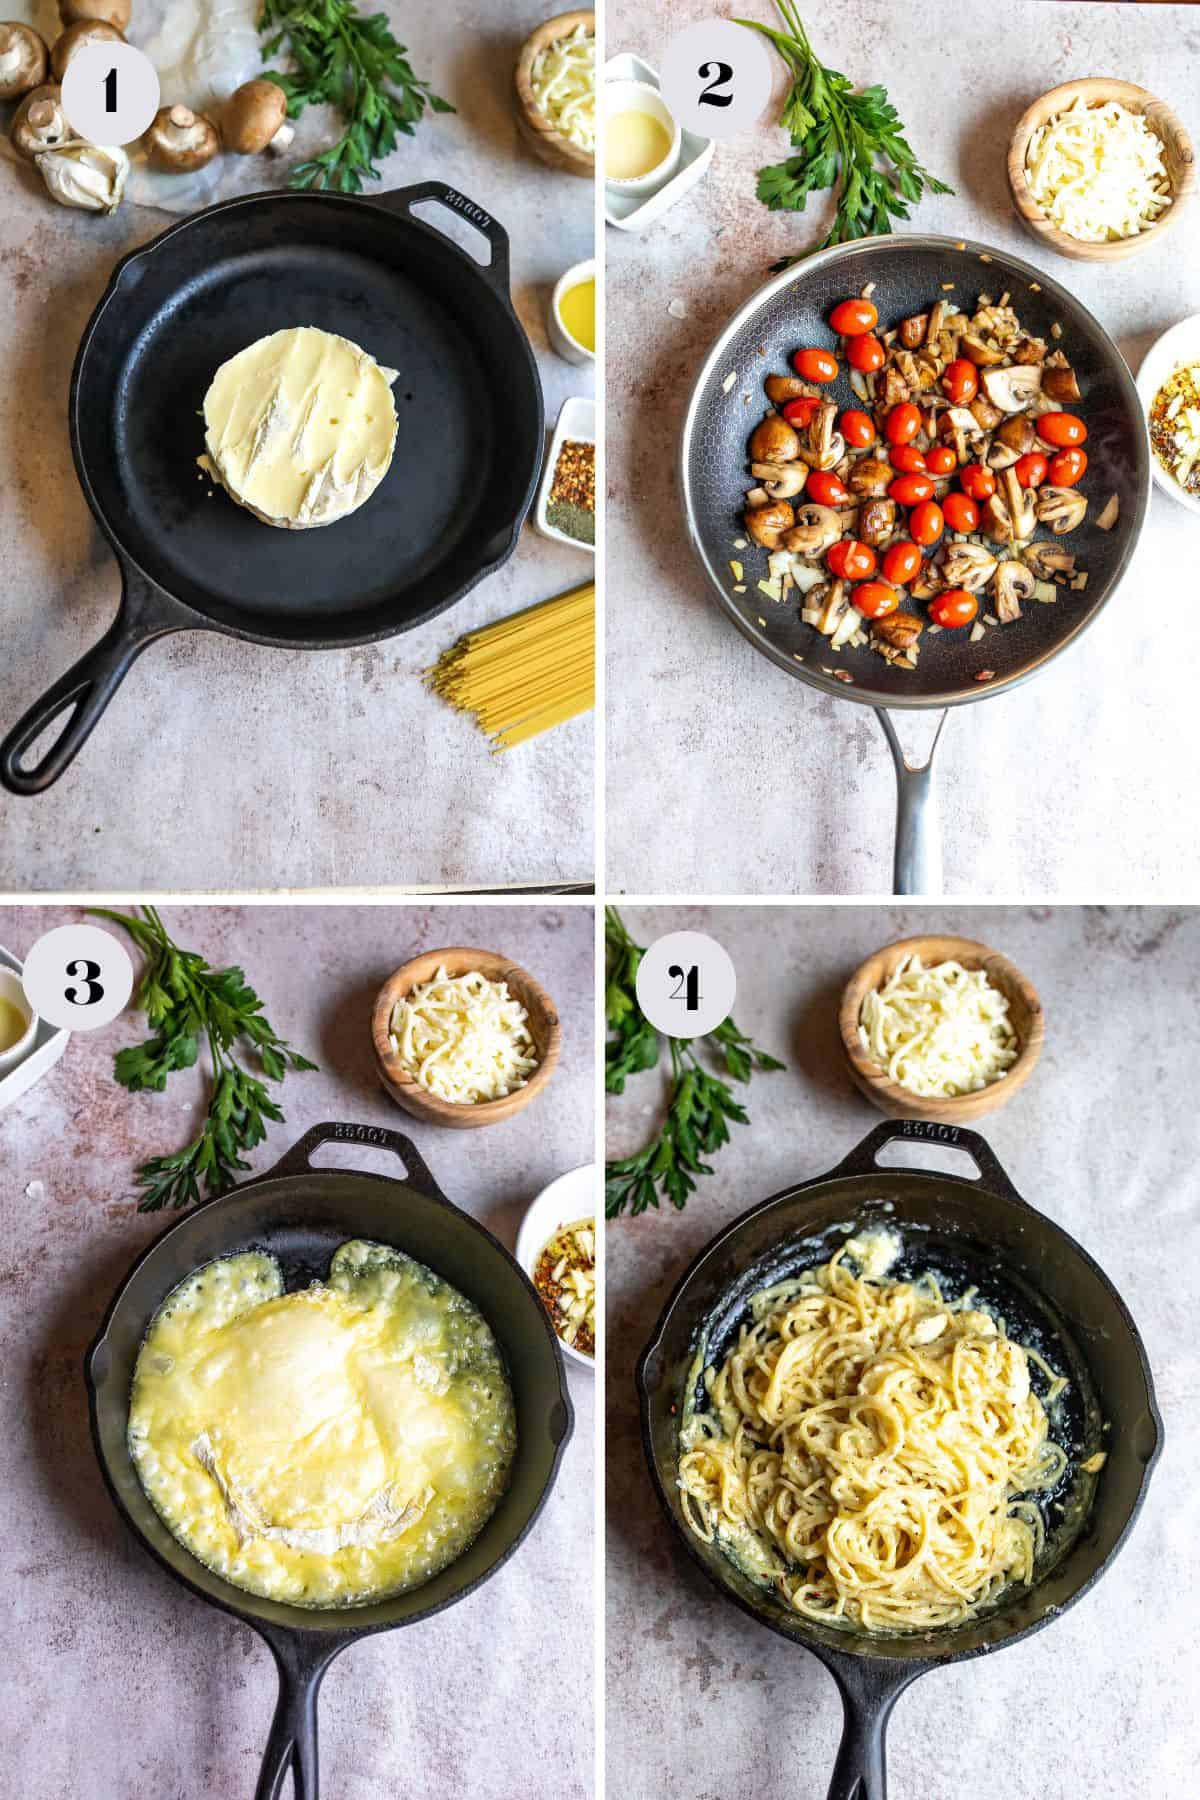 Steps to make this recipe. Black skillet with cheese, sautéed veggies and spaghetti.